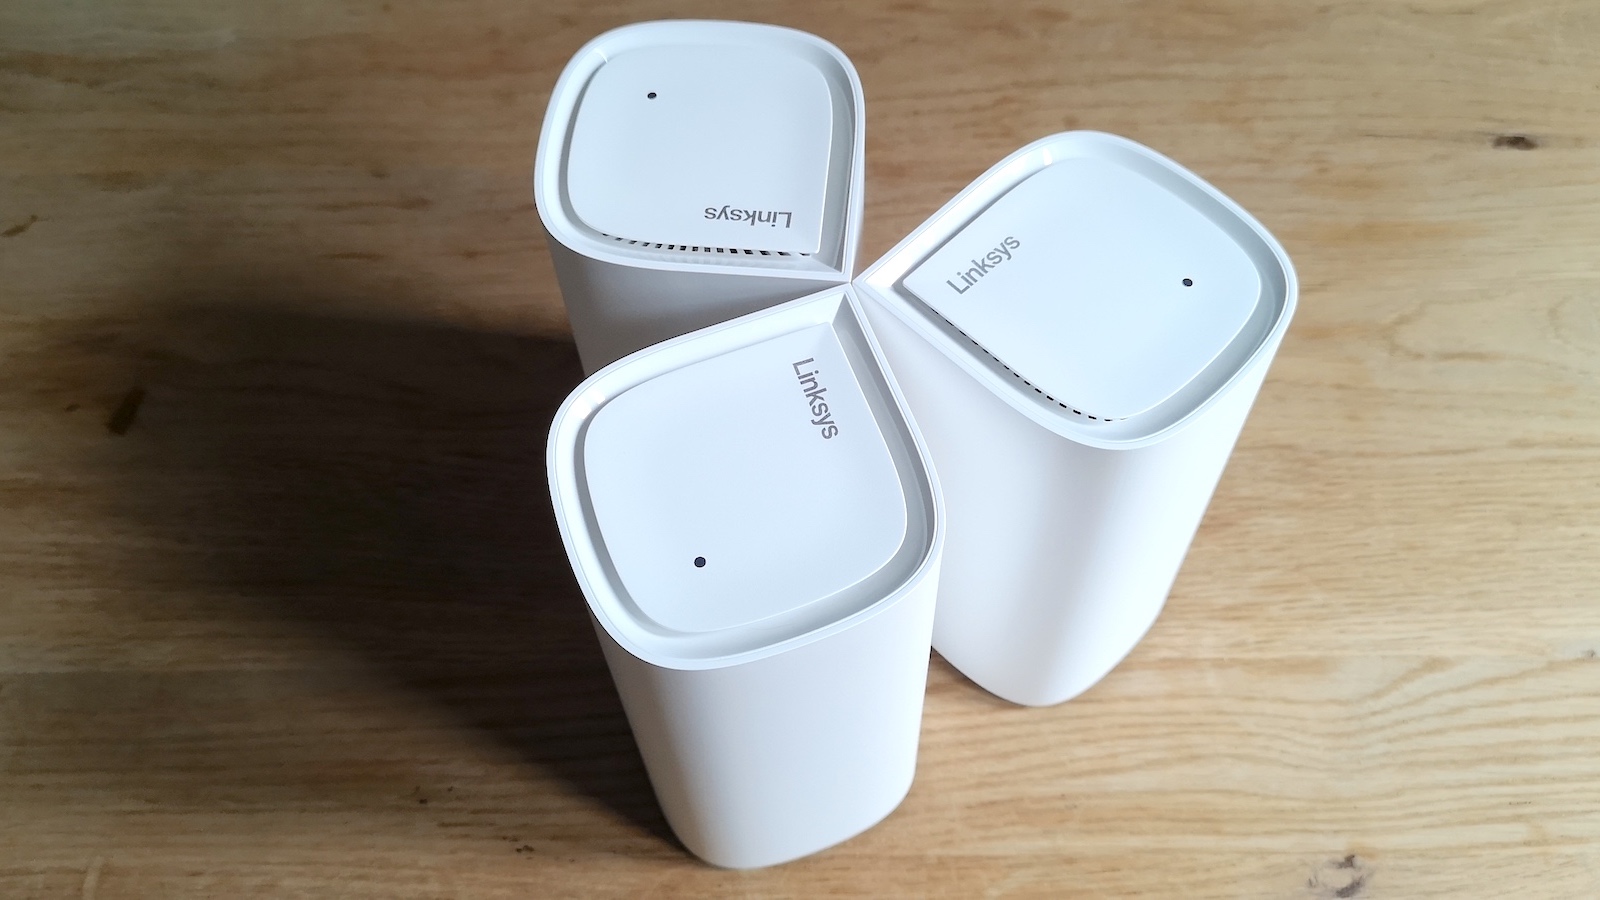 Three Linksys Velop Pro 6E mesh Wi-Fi review units viewed from above, displaying the teardrop shape of the cases